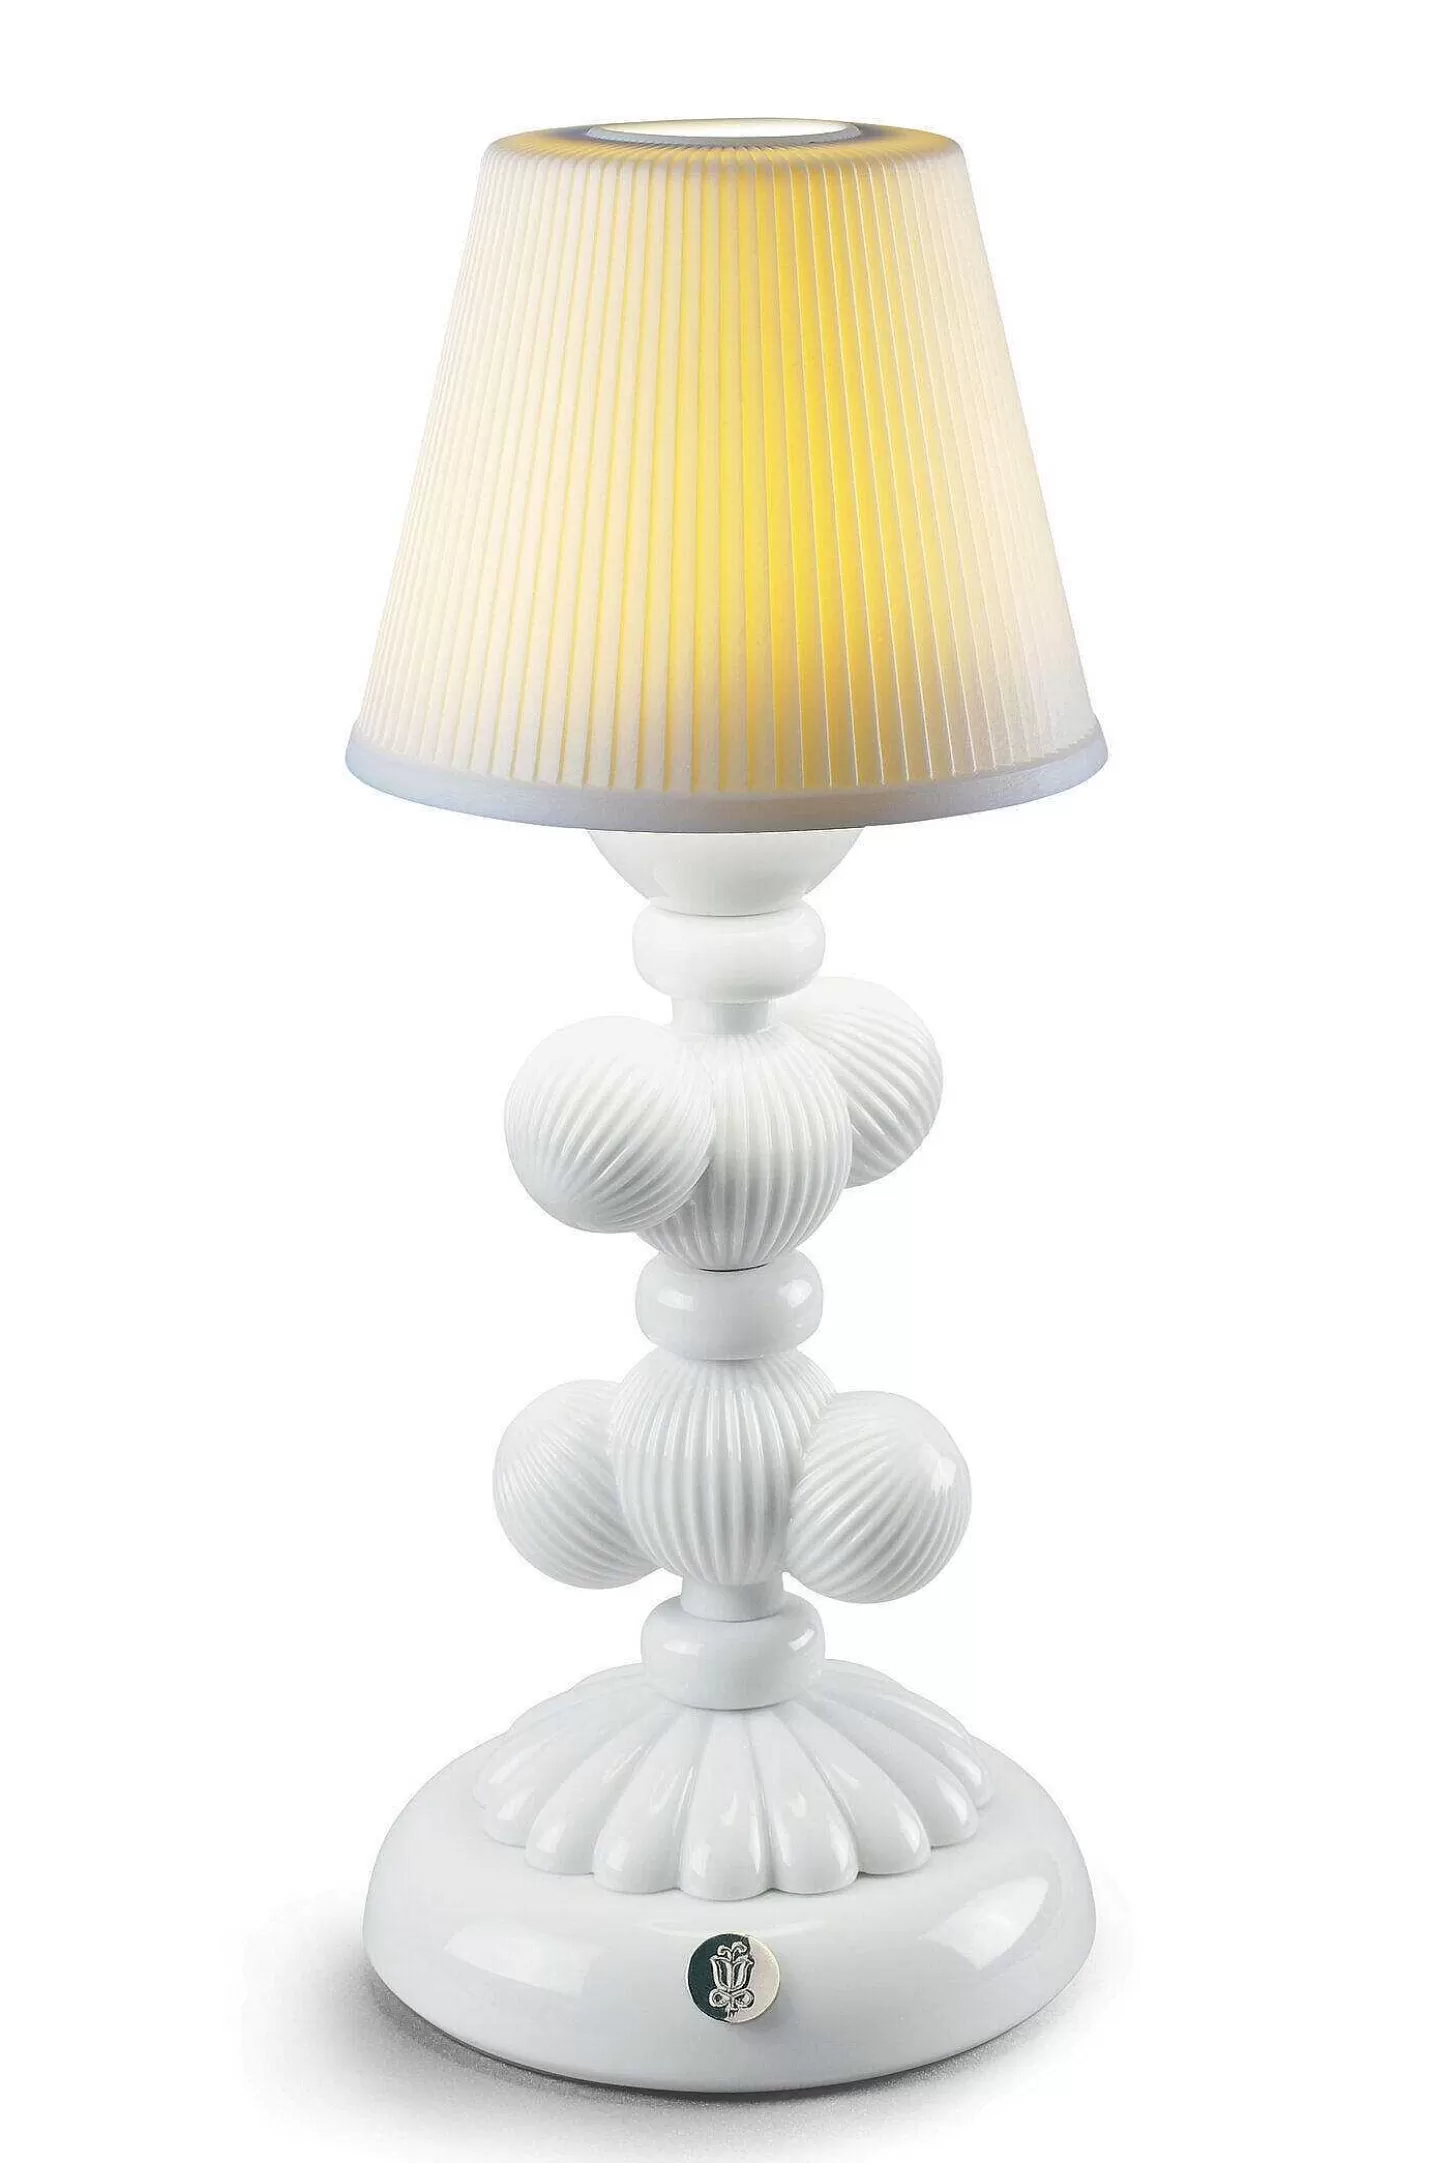 Lladró Cactus Firefly Table Lamp. White^ Lighting